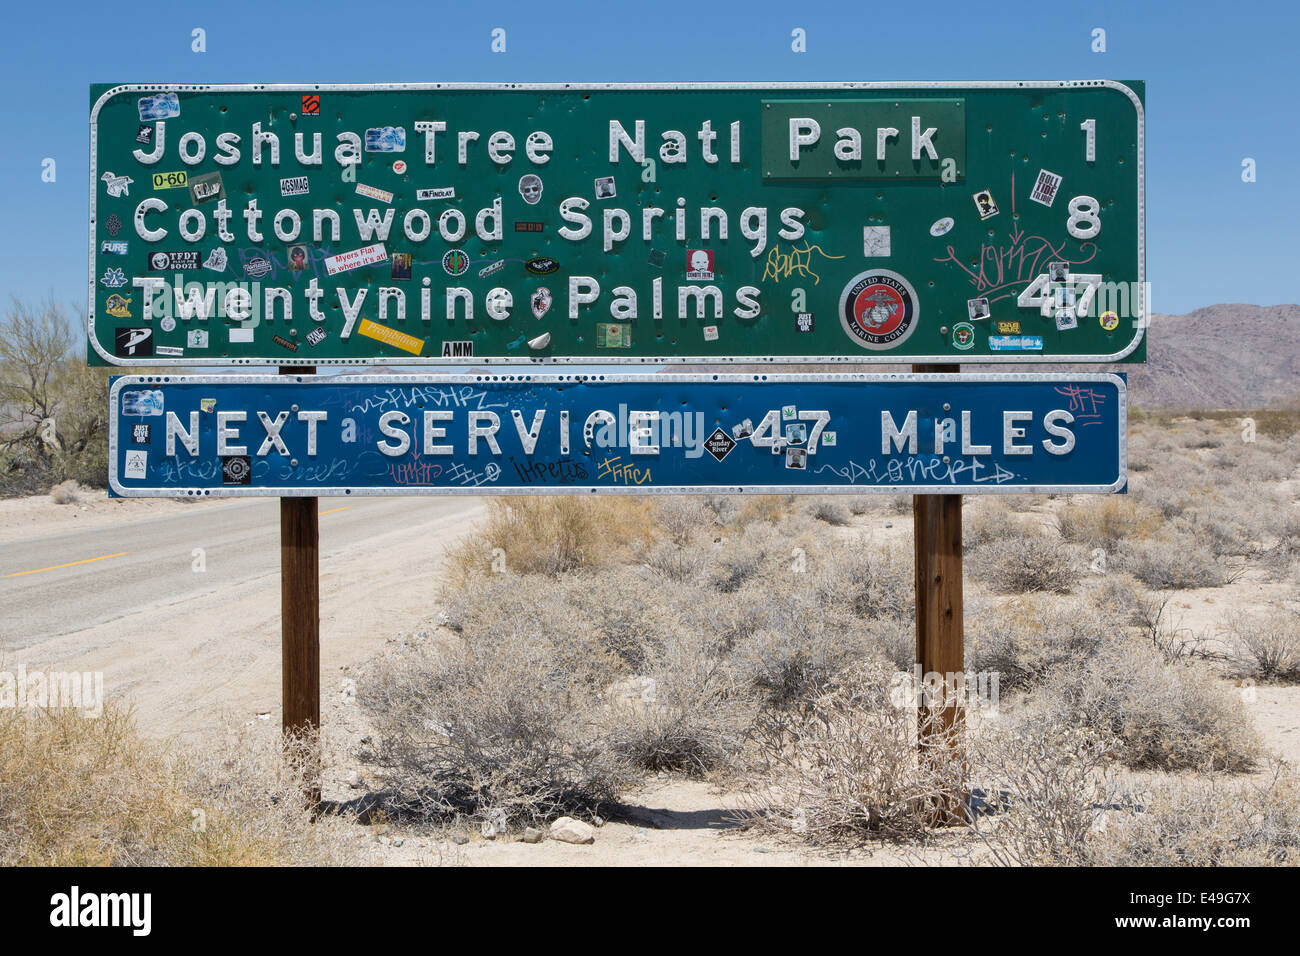 Road sign for Joshua Tree National Park, California with many stickers attached Stock Photo